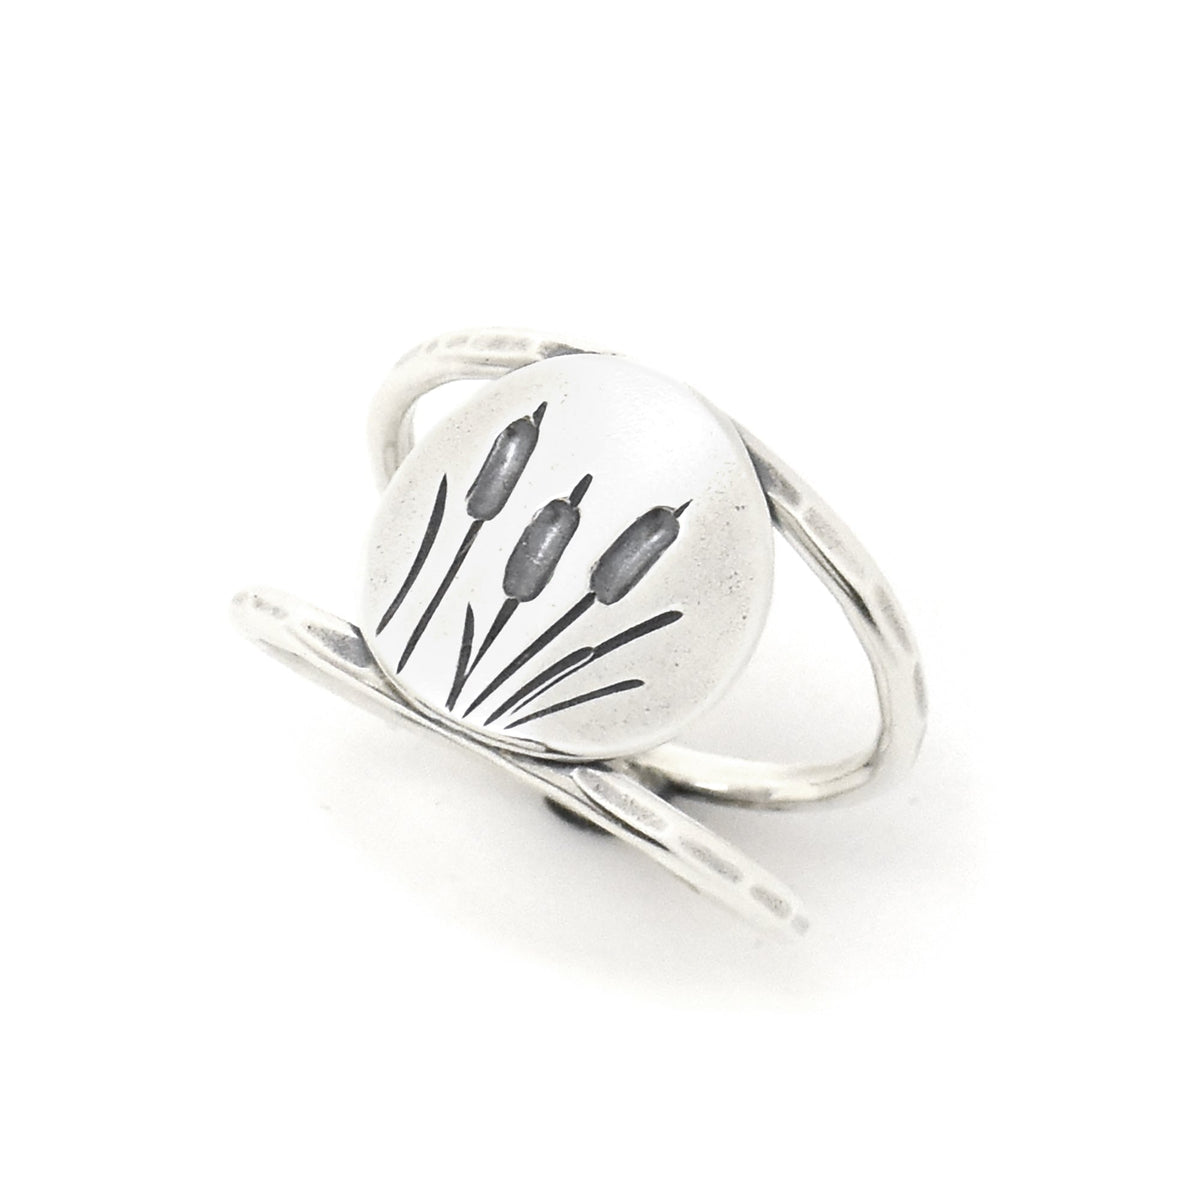 Cattails Ring - Ring Select Size 4 6882 - handmade by Beth Millner Jewelry